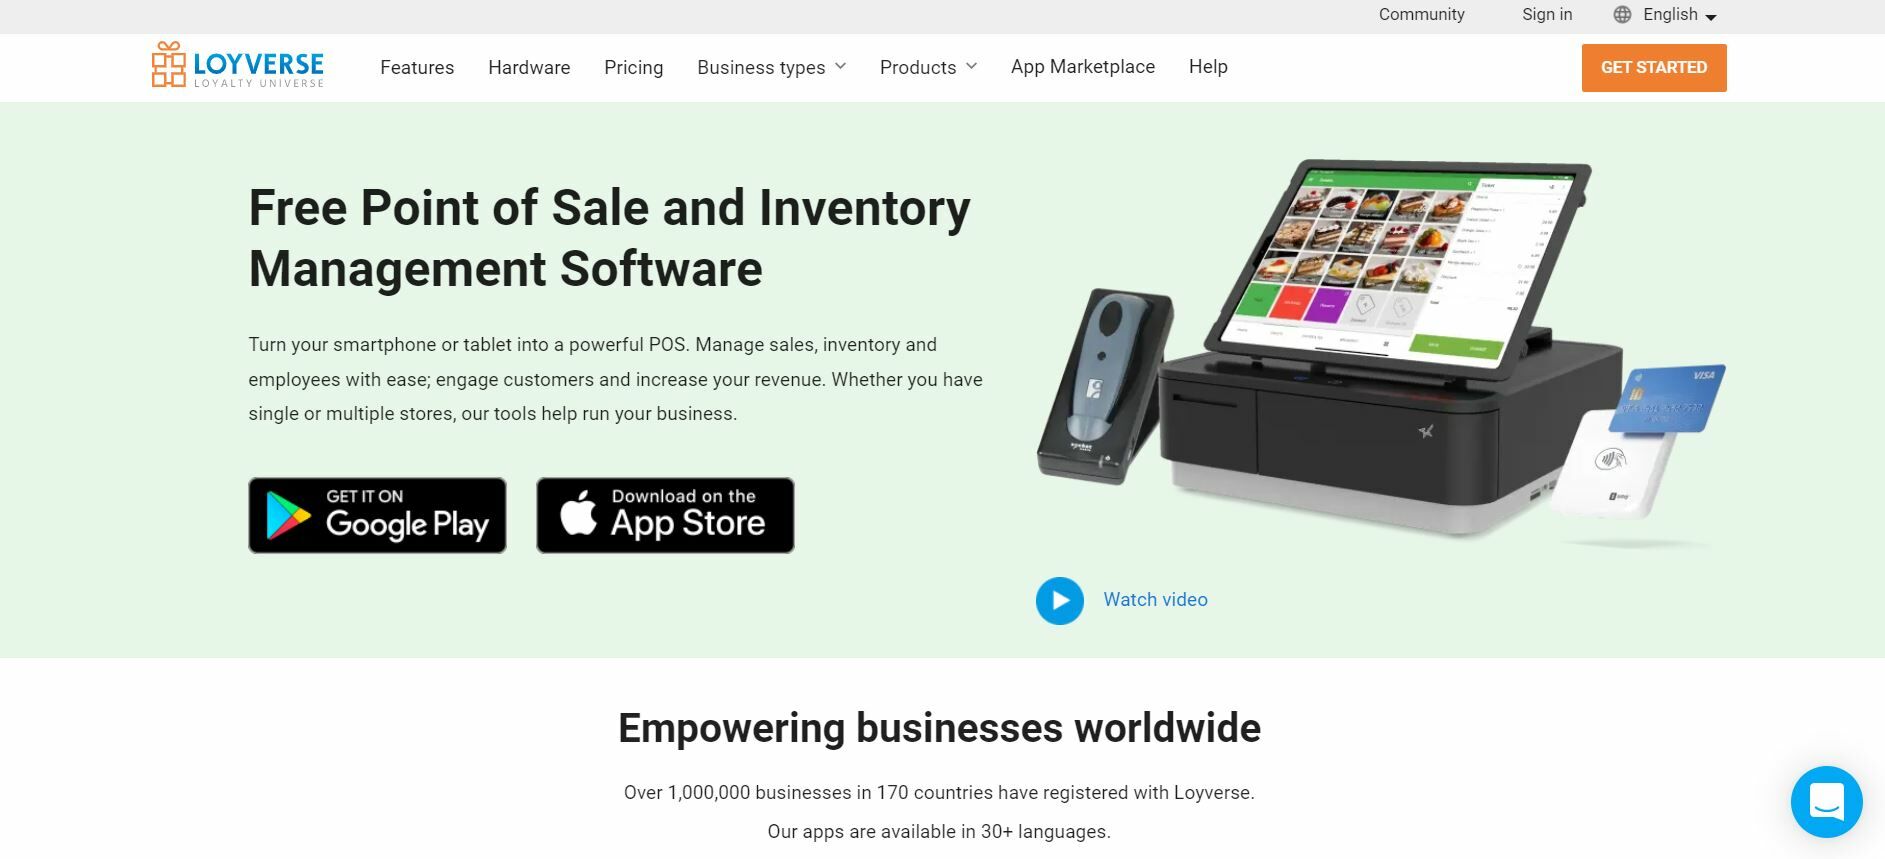 Apps and Tools for Small Businesses| Loyverse.